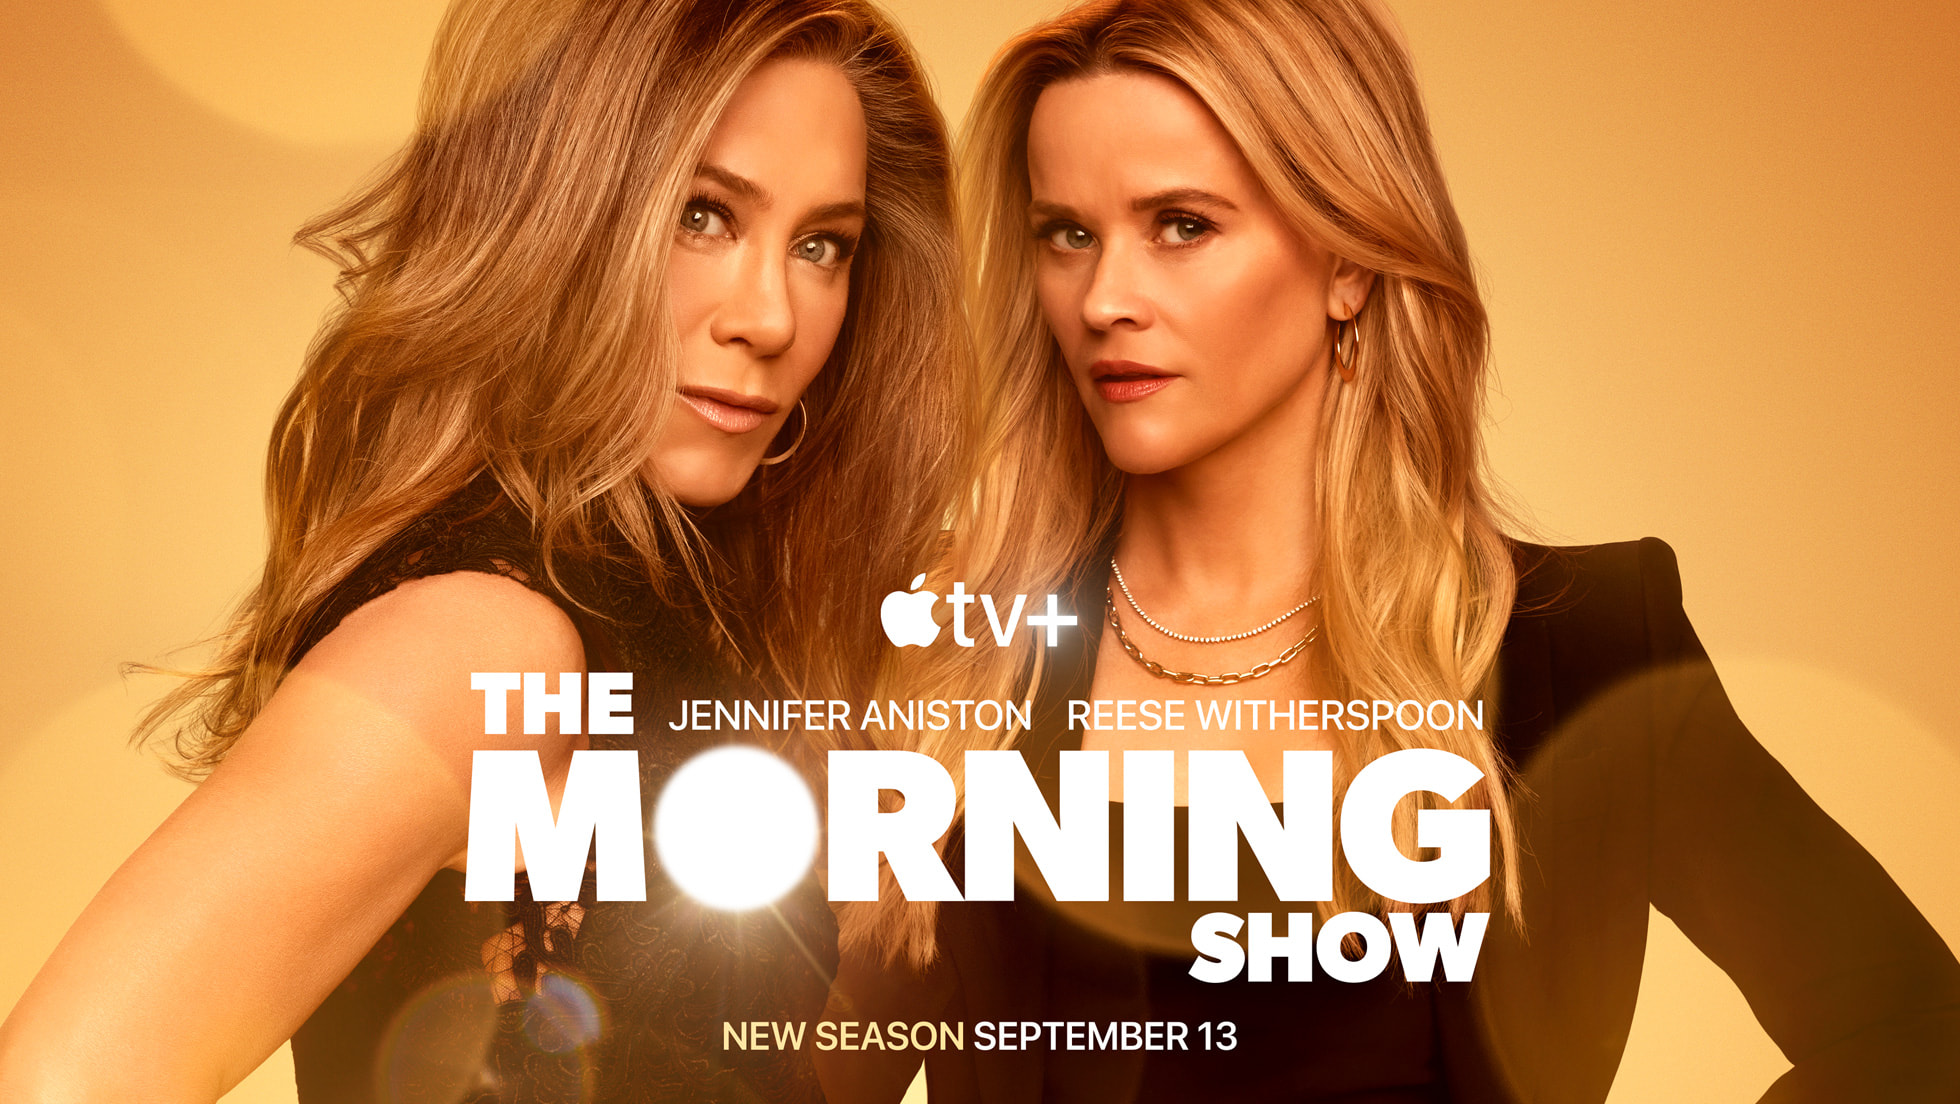 Apple's Emmy Award-winning series “The Morning Show, starring and